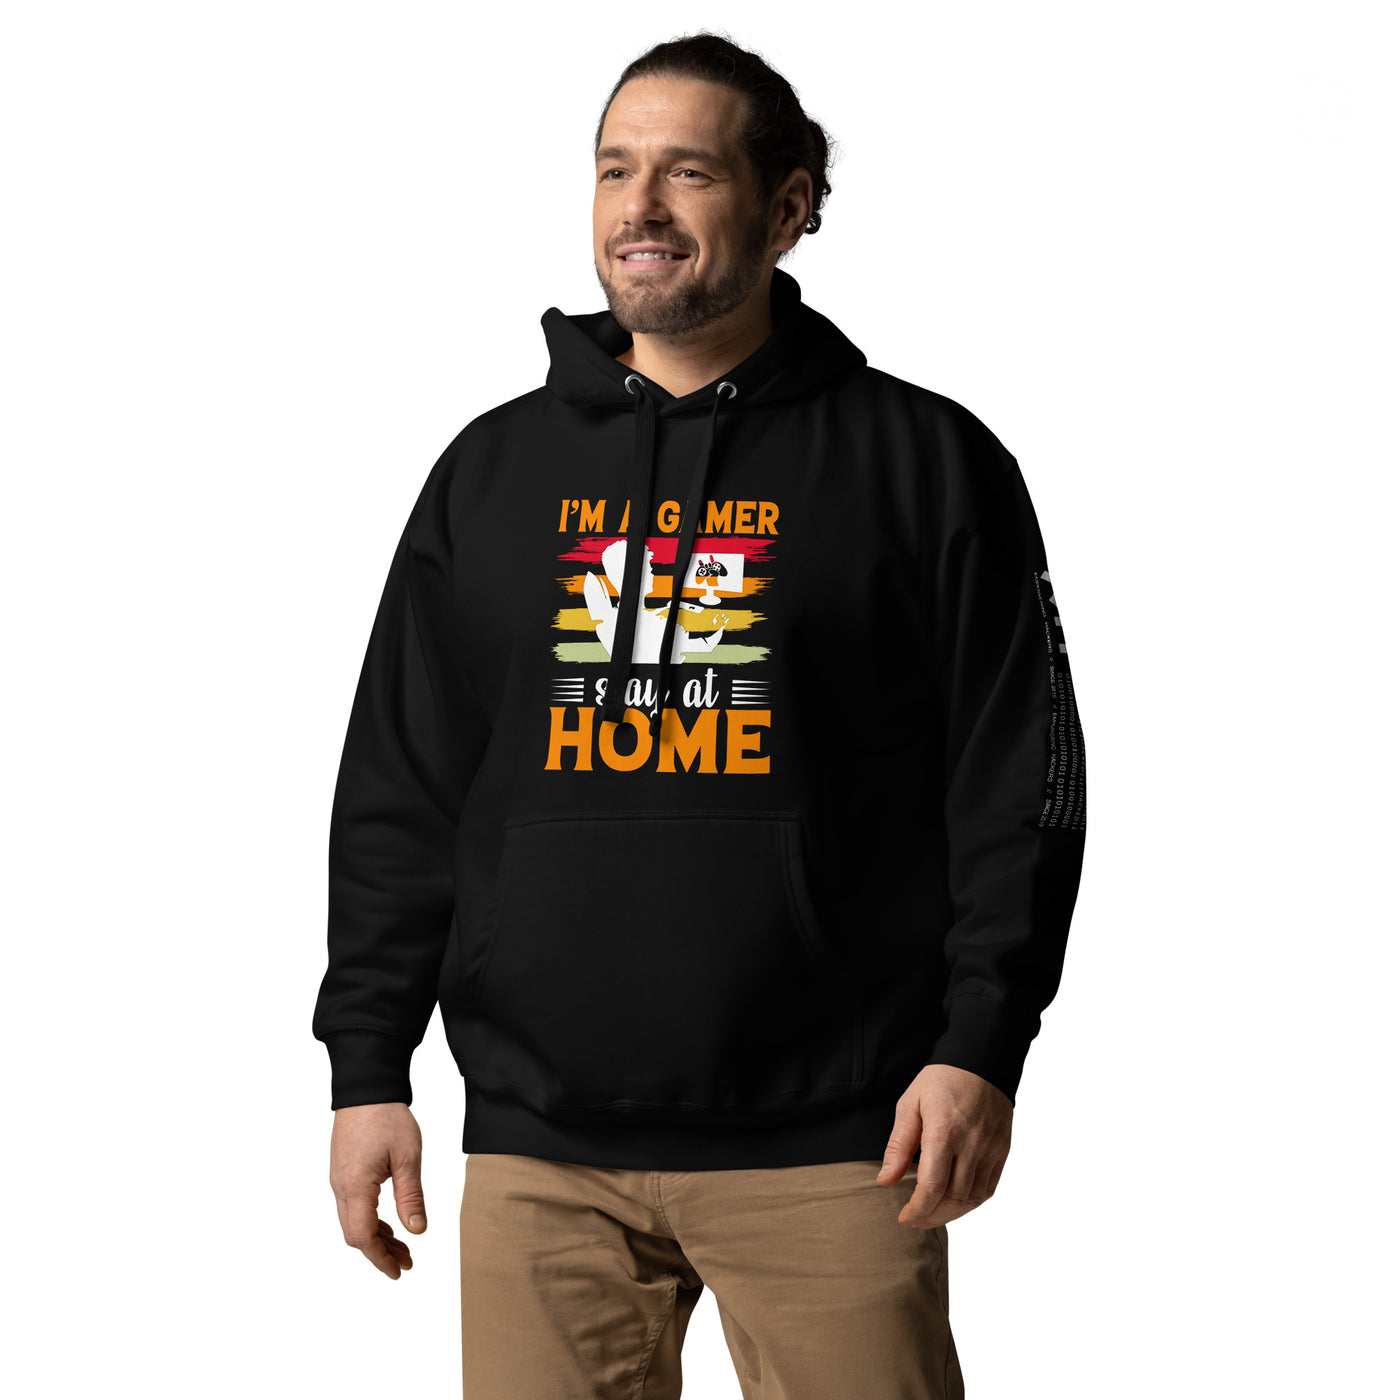 I am a Gamer Stay at Home - Unisex Hoodie